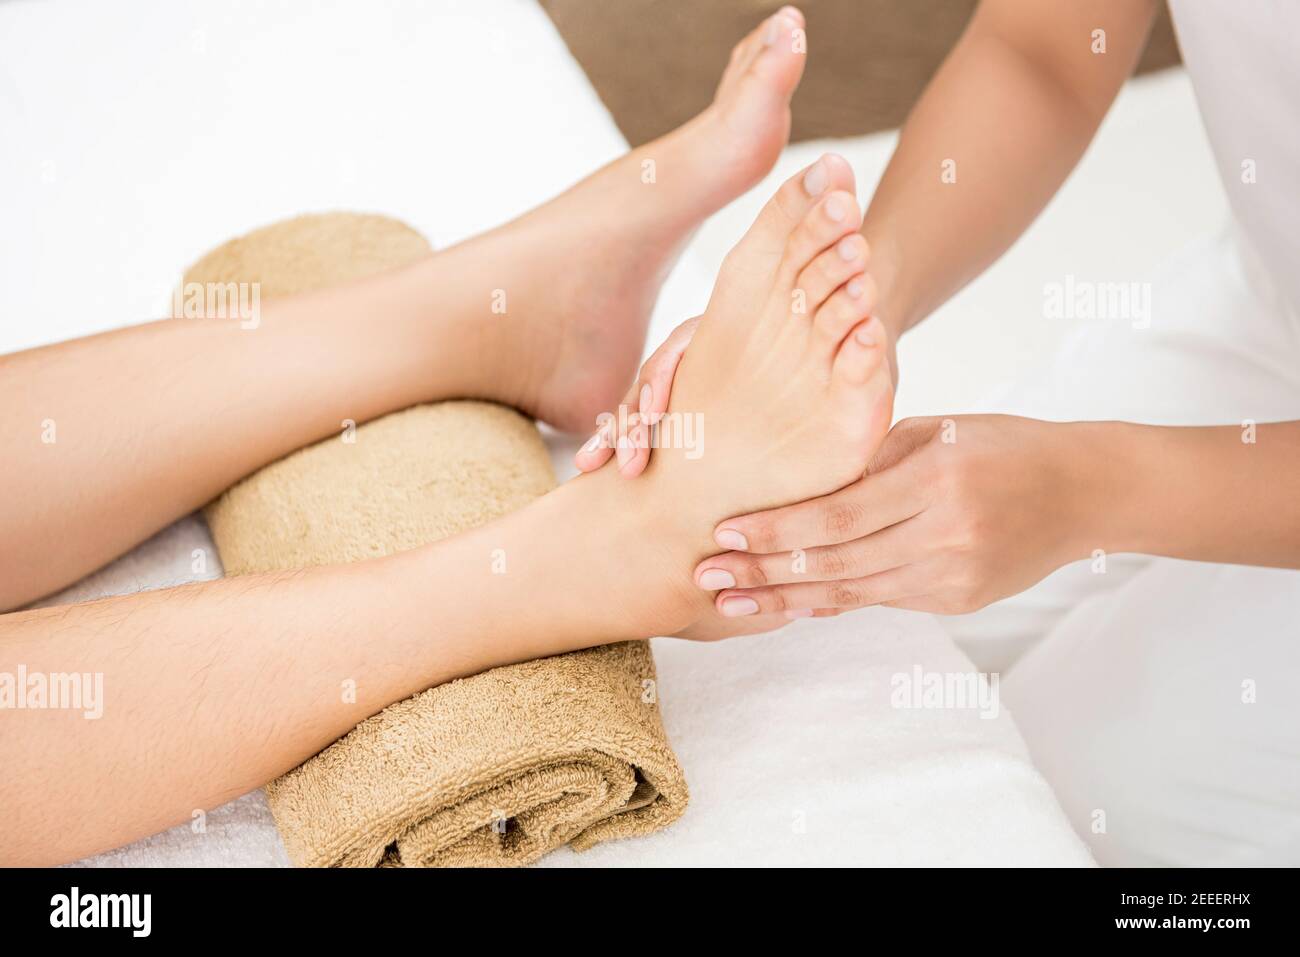 Professional therapist giving relaxing traditional thai reflexology foot massage to a woman in spa Stock Photo